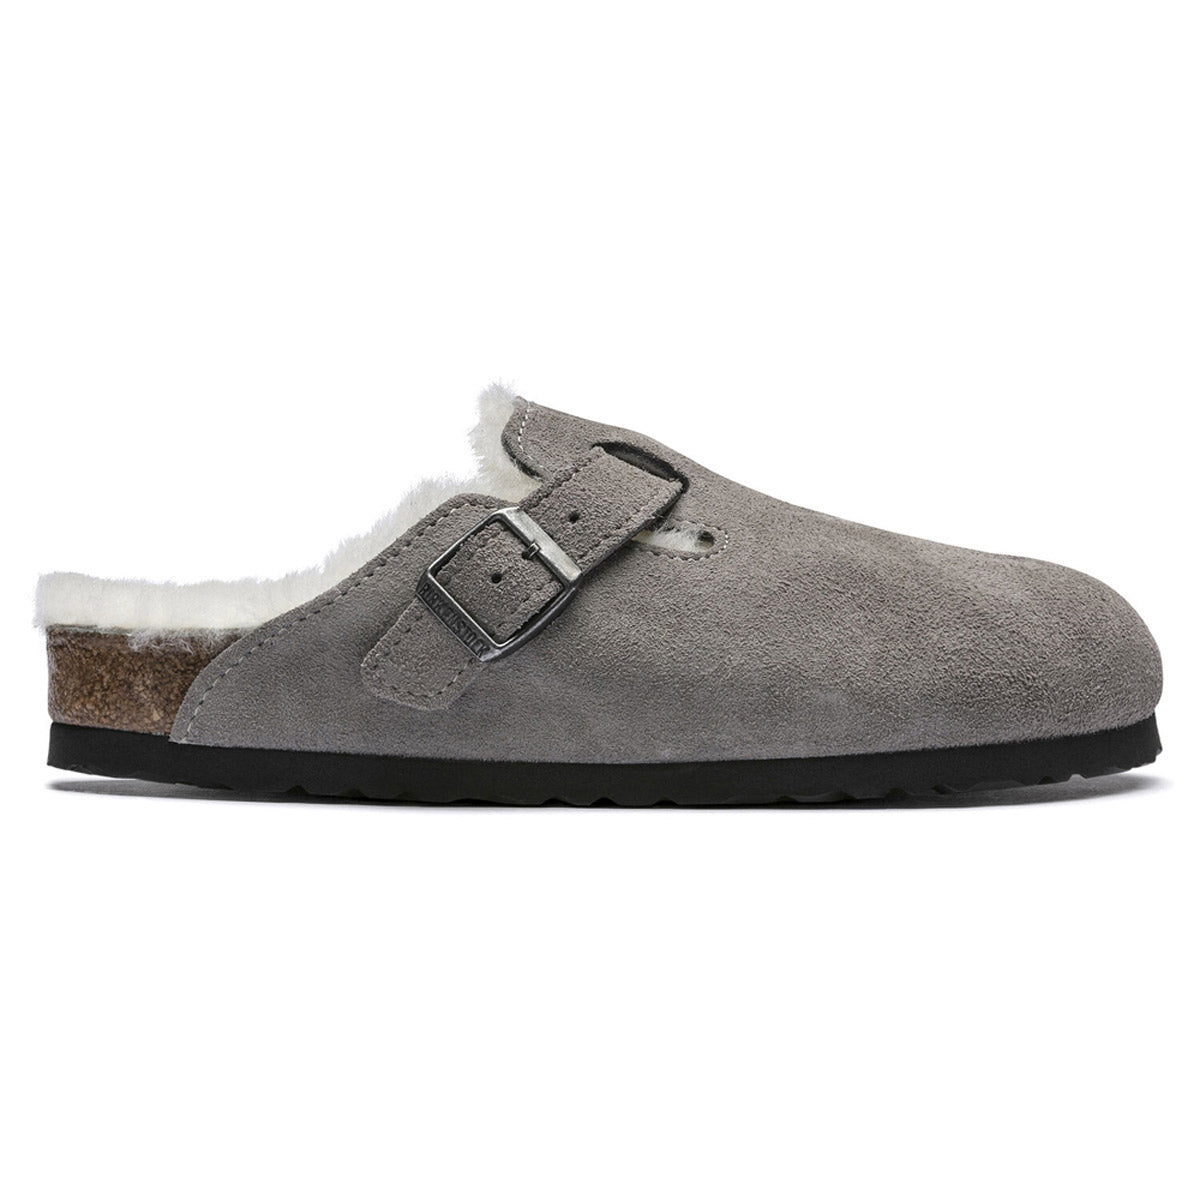 Birkenstock BIRKENSTOCK BOSTON SHEARLING STONE COIN - WOMENS with a black sole and faux fur lining, featuring an adjustable metal buckle strap across the top and an anatomically formed cork-latex footbed.